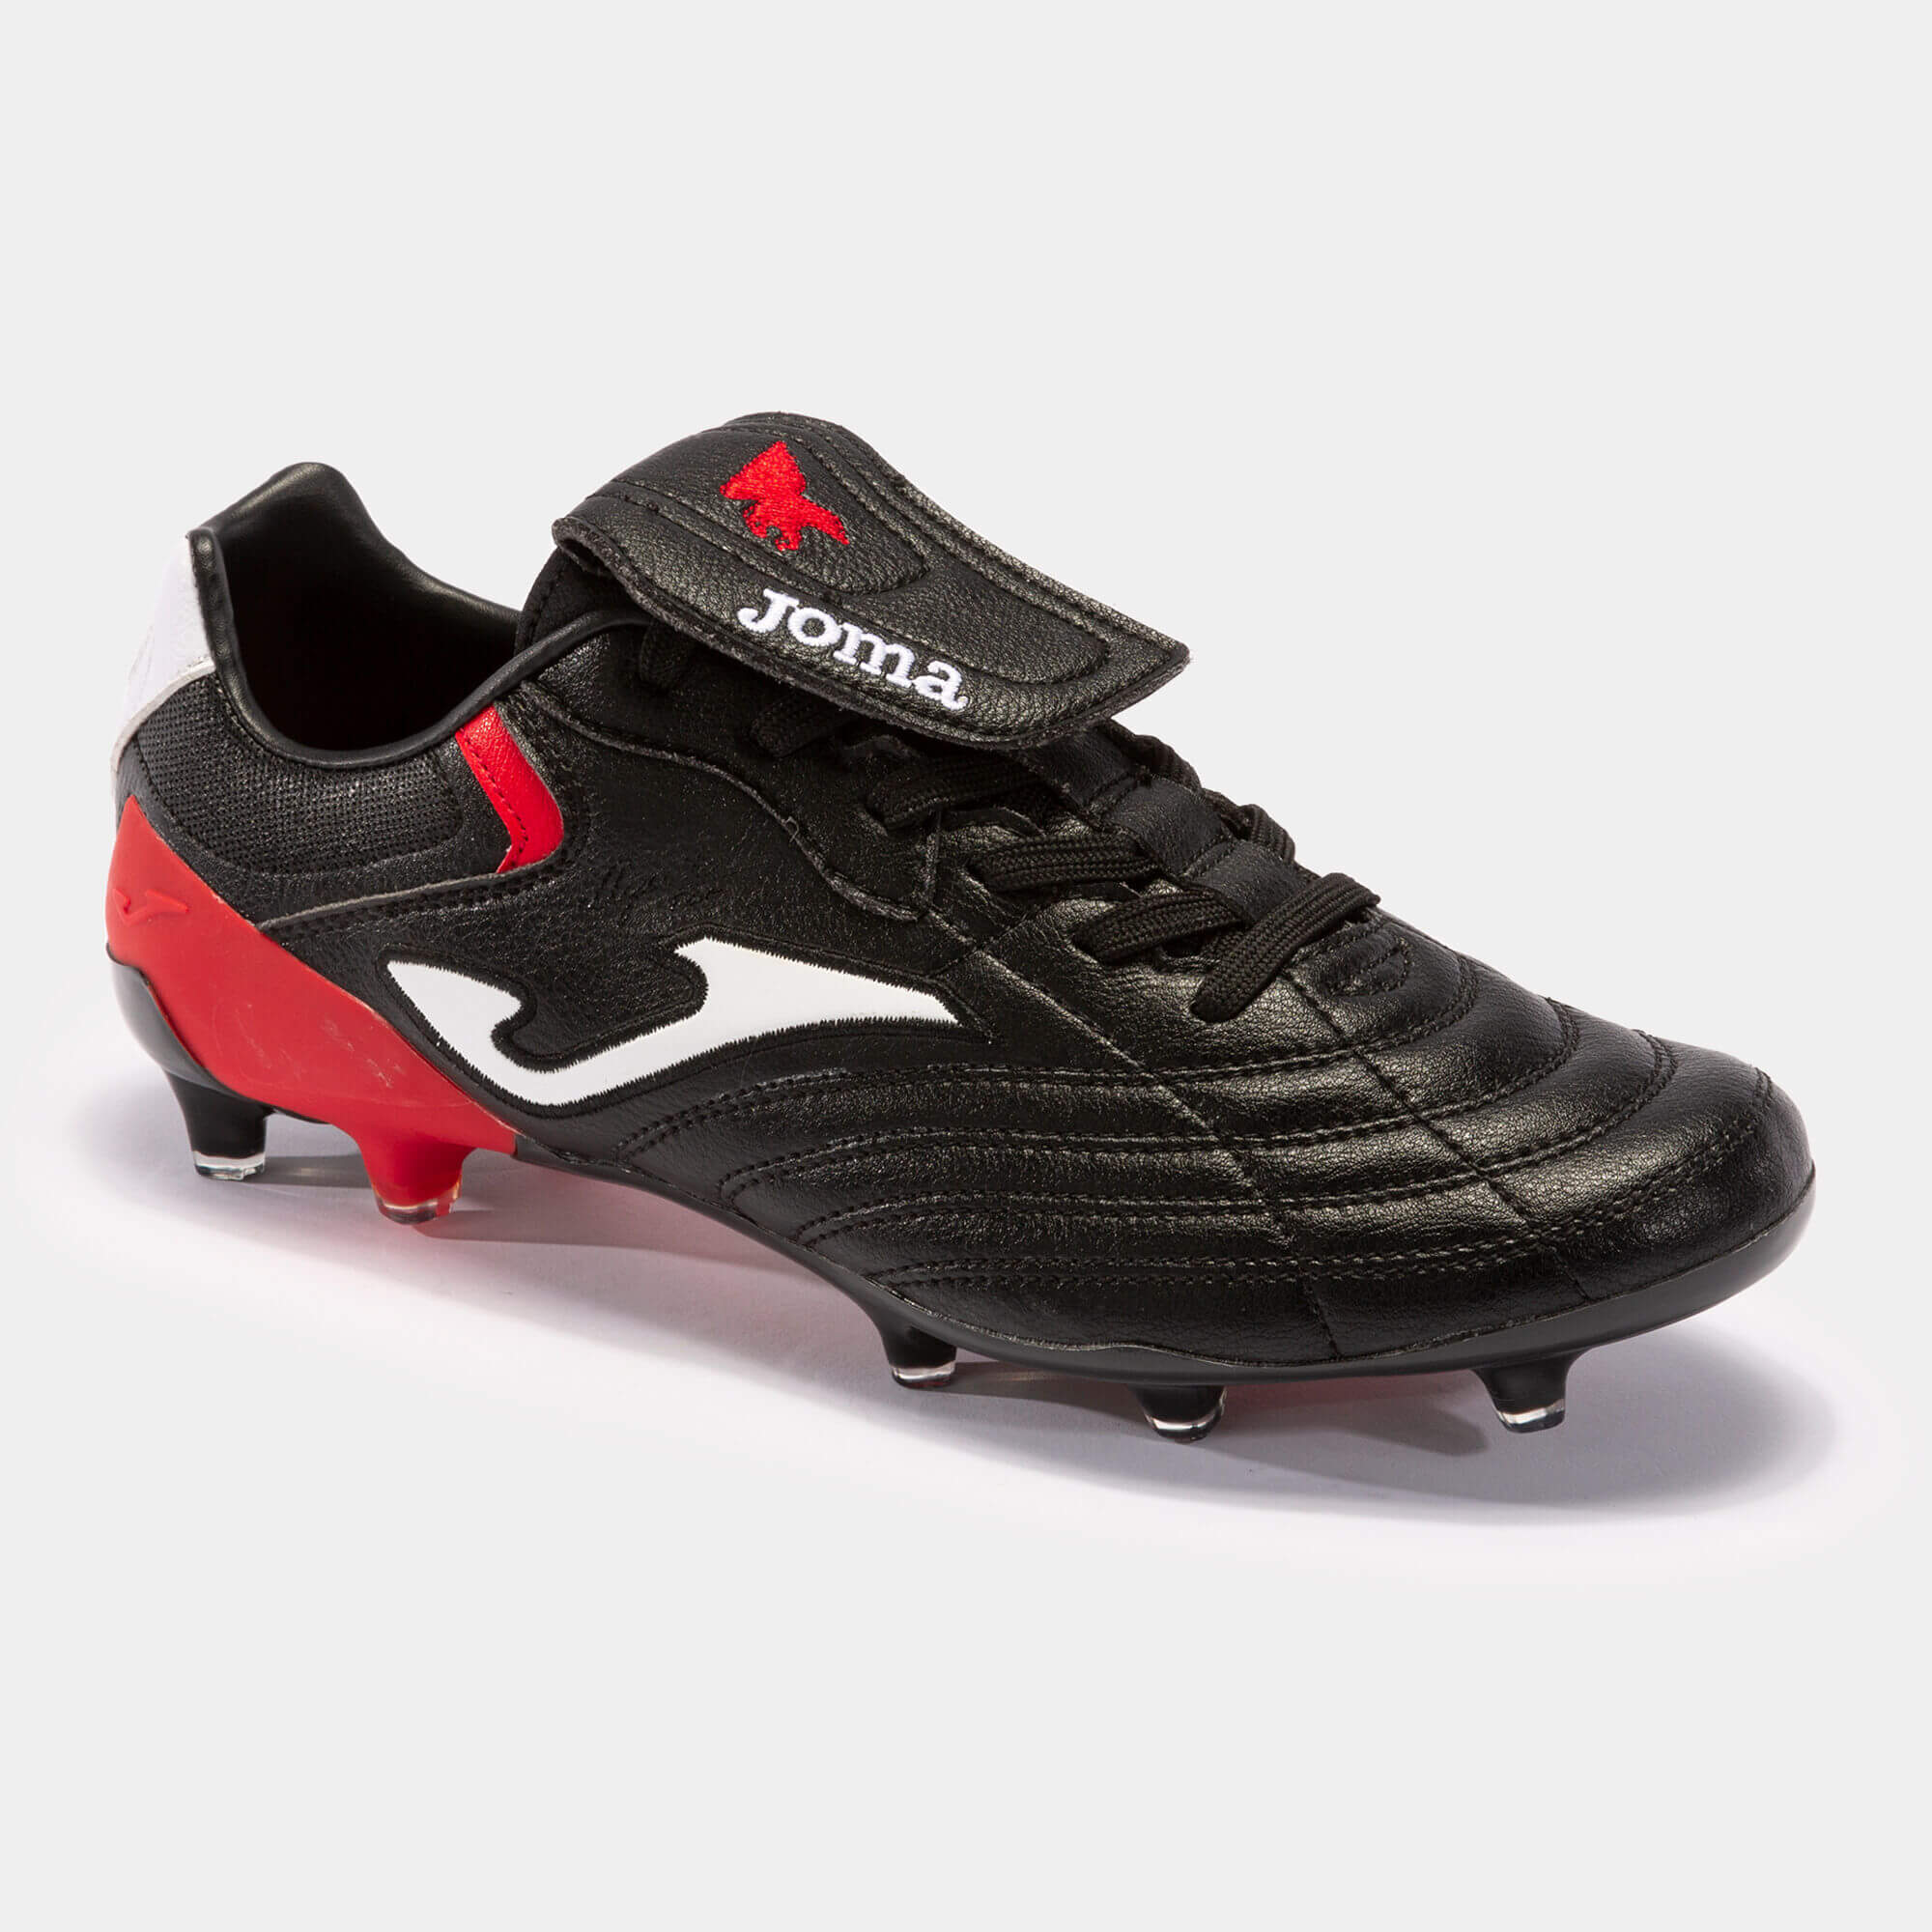 Joma Aguila Cup 2301 FG-Black/Red